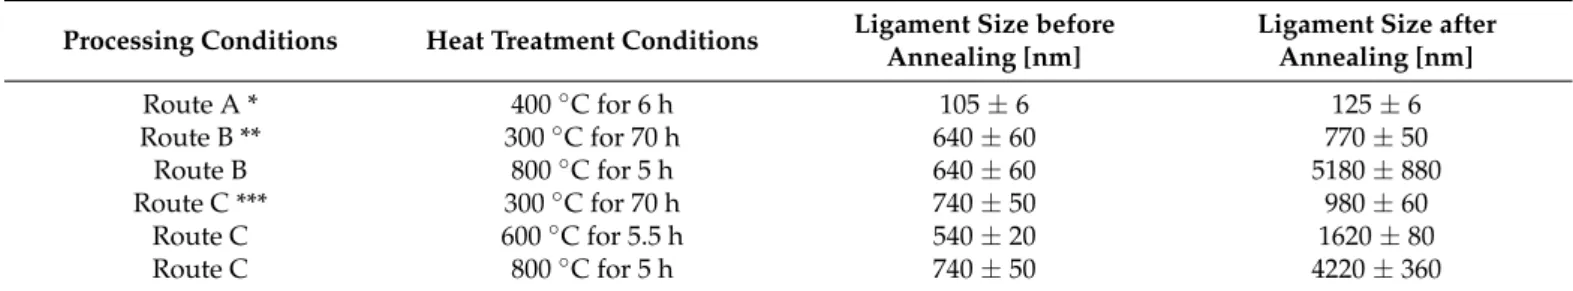 Table 1. Ligament sizes of Cu foams processed and heat-treated under different conditions before and after thermal annealing.